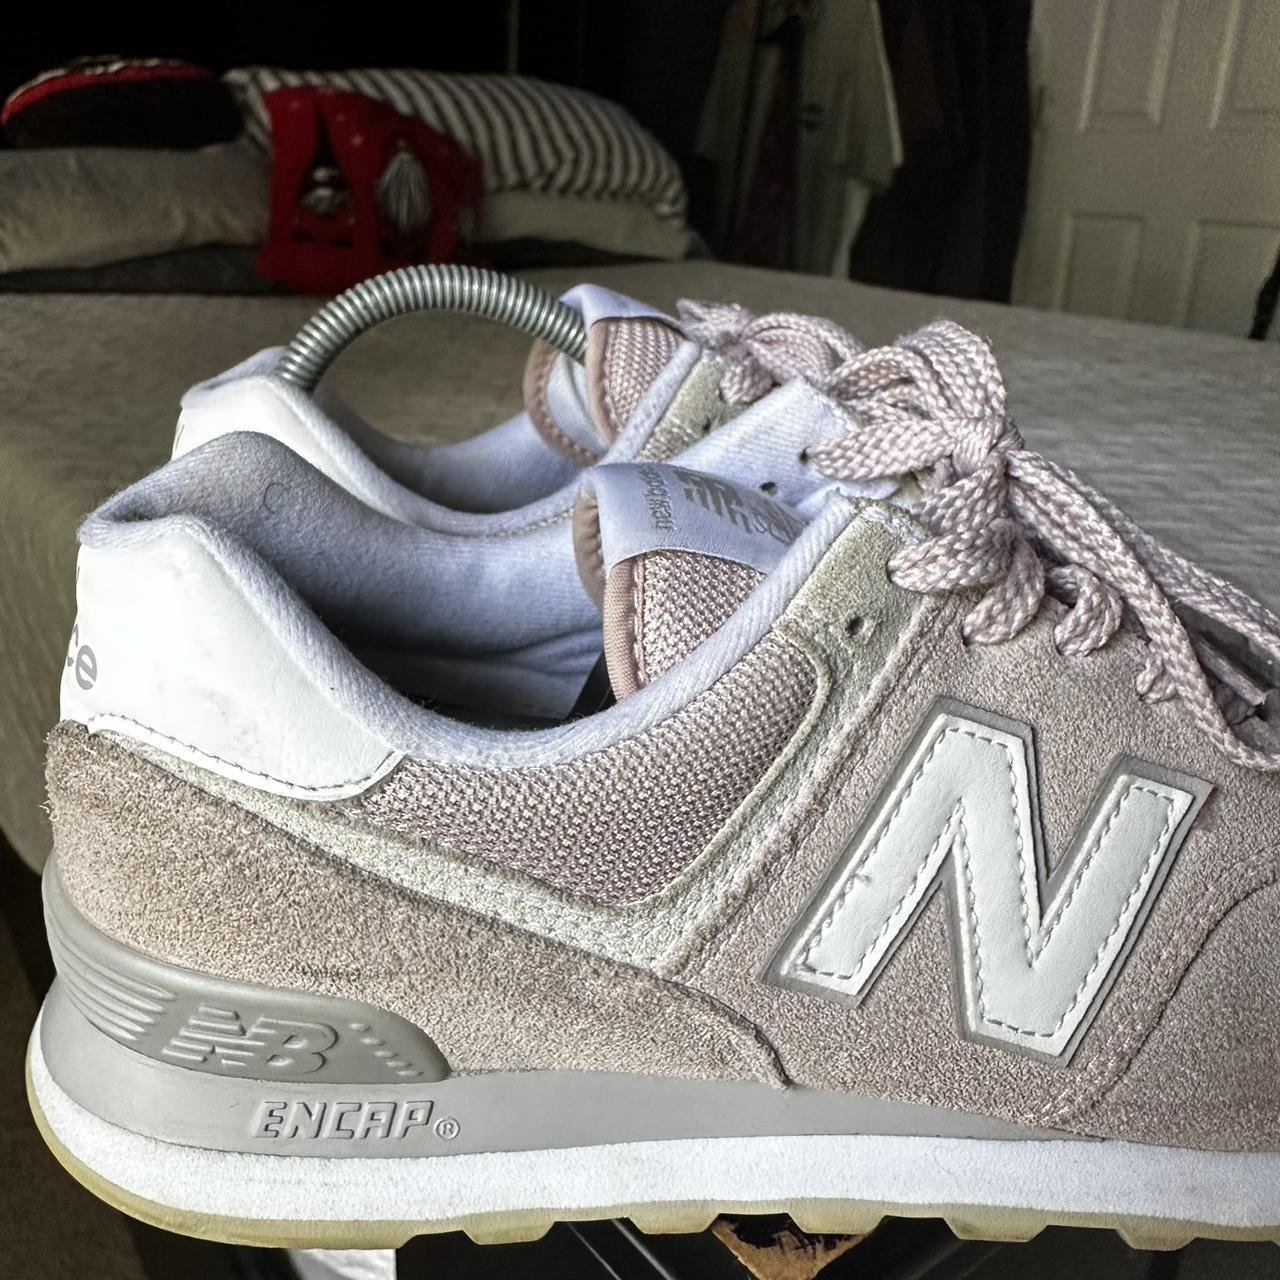 New Balance Women's Pink and White Trainers (4)